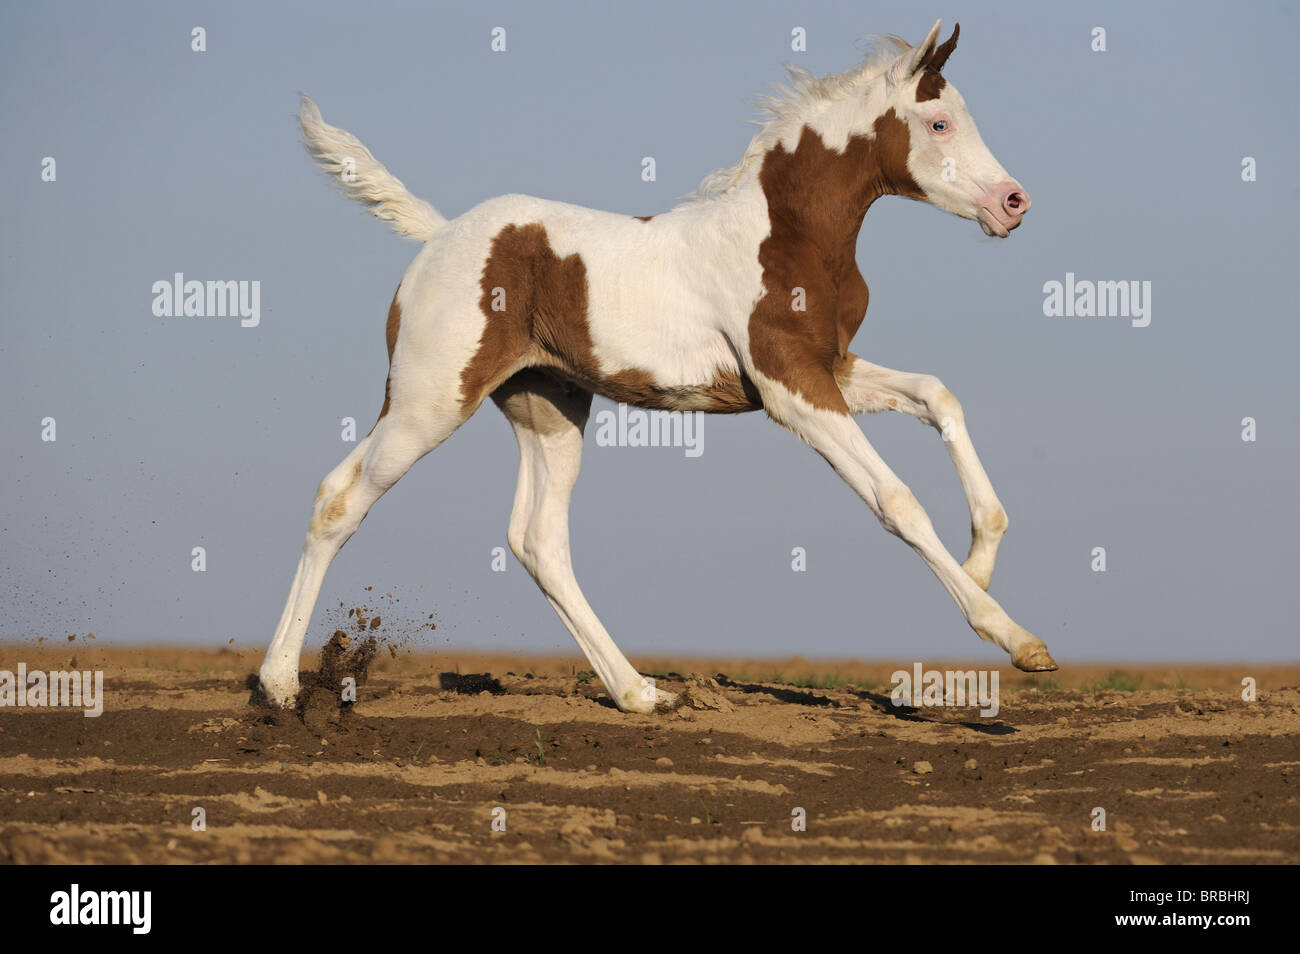 Arabian Pinto Horse (Equus ferus caballus), foal in a gallop on a field. Stock Photo